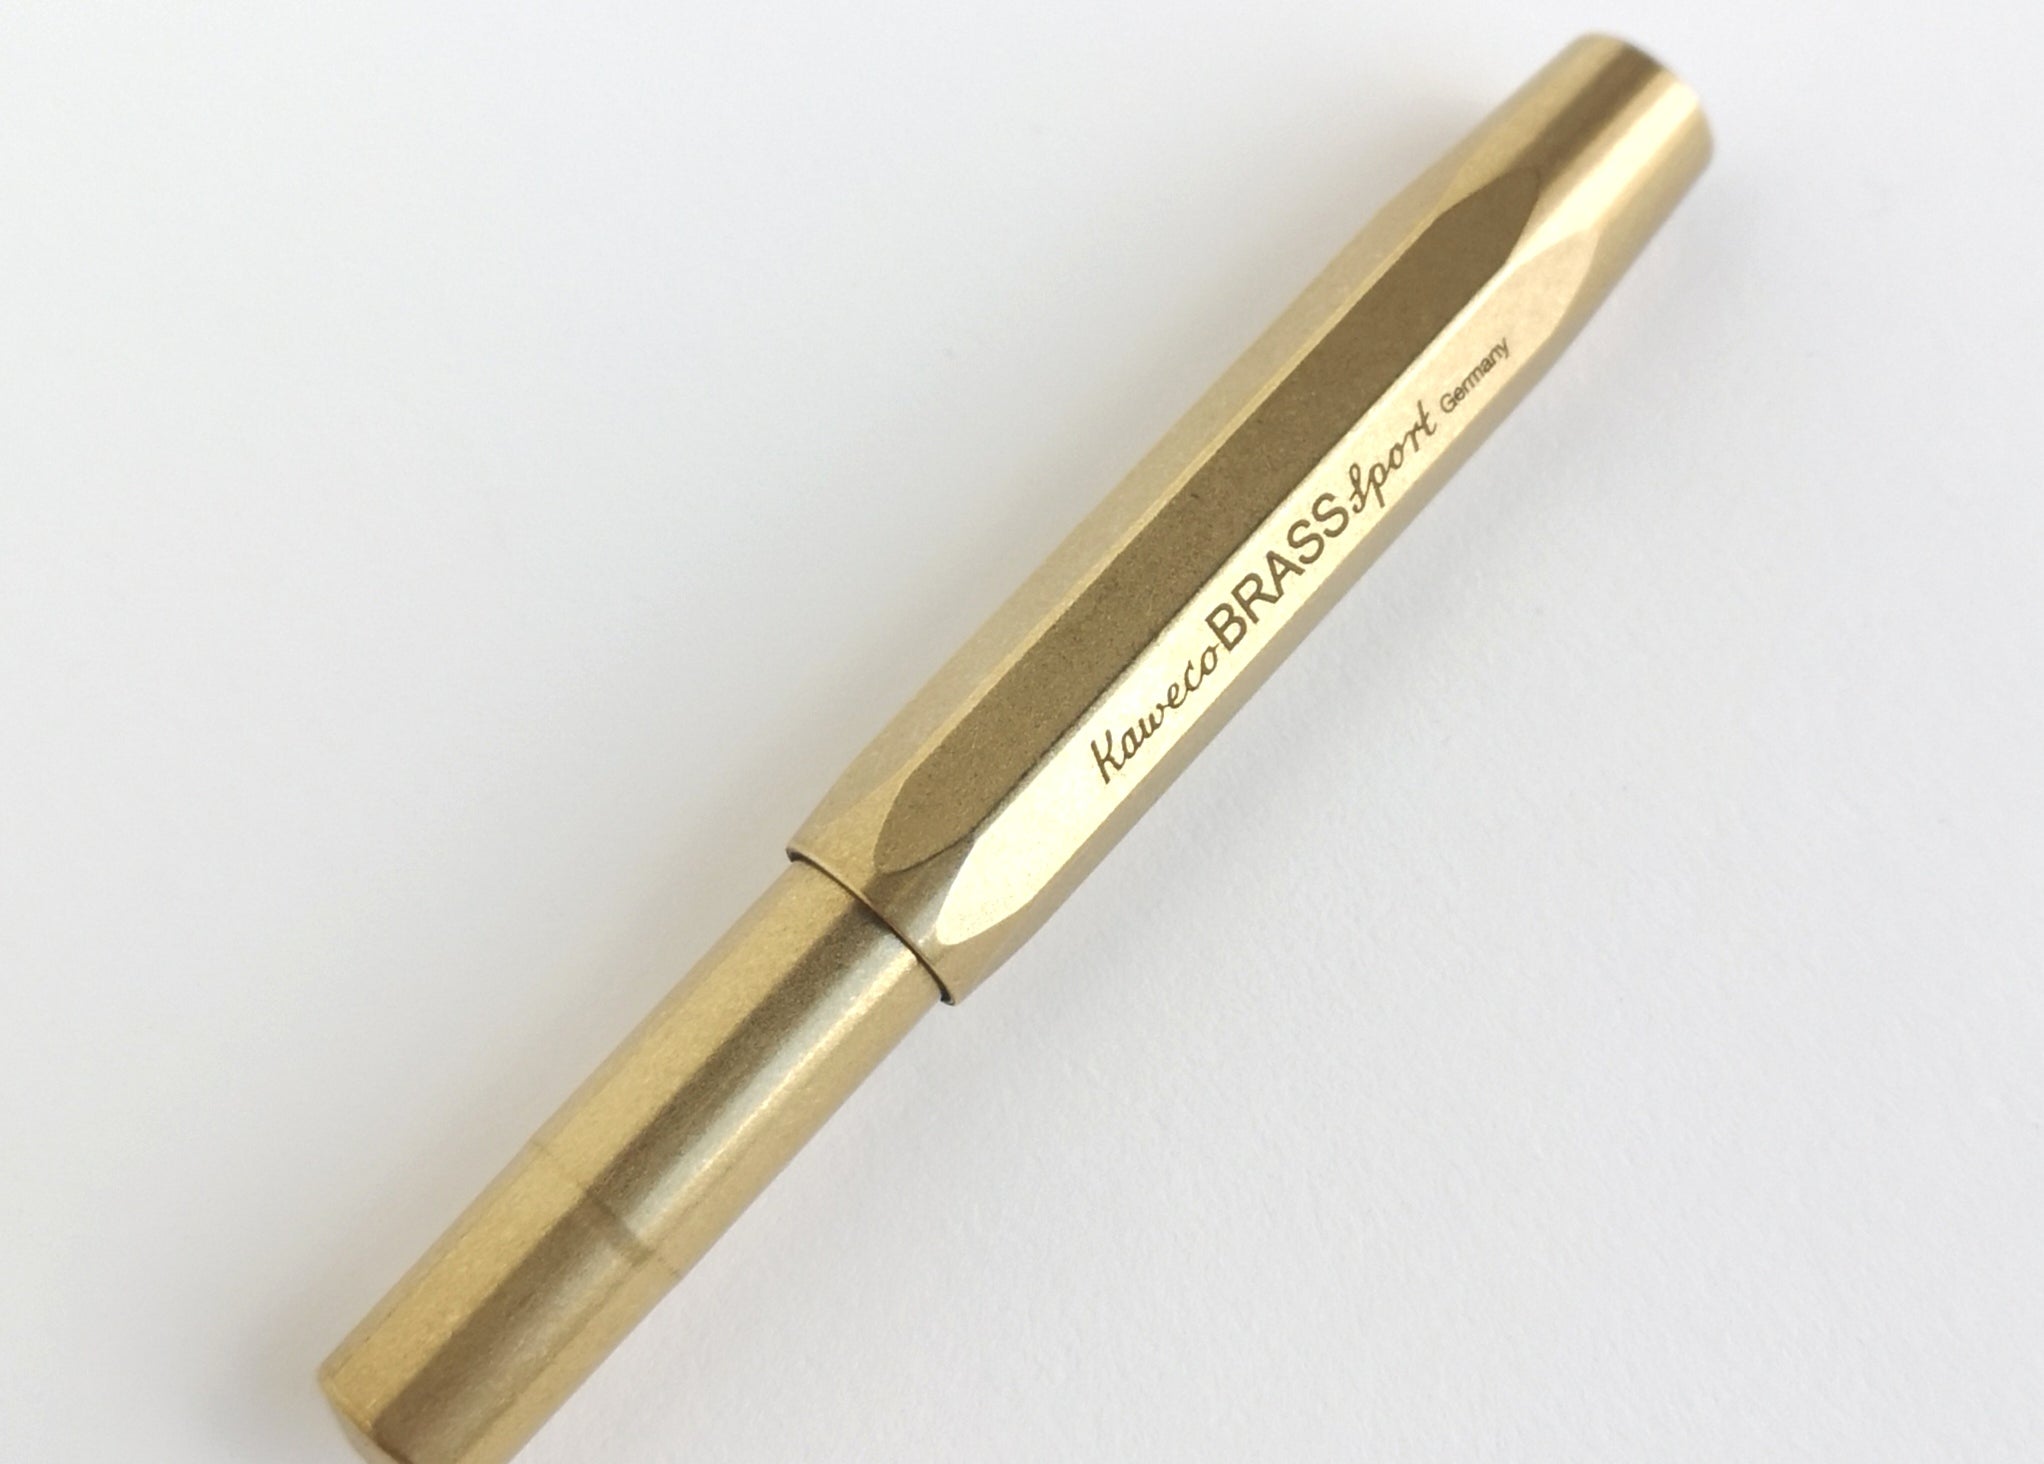 Brass Kaweco Sport Fountain pen with cap on